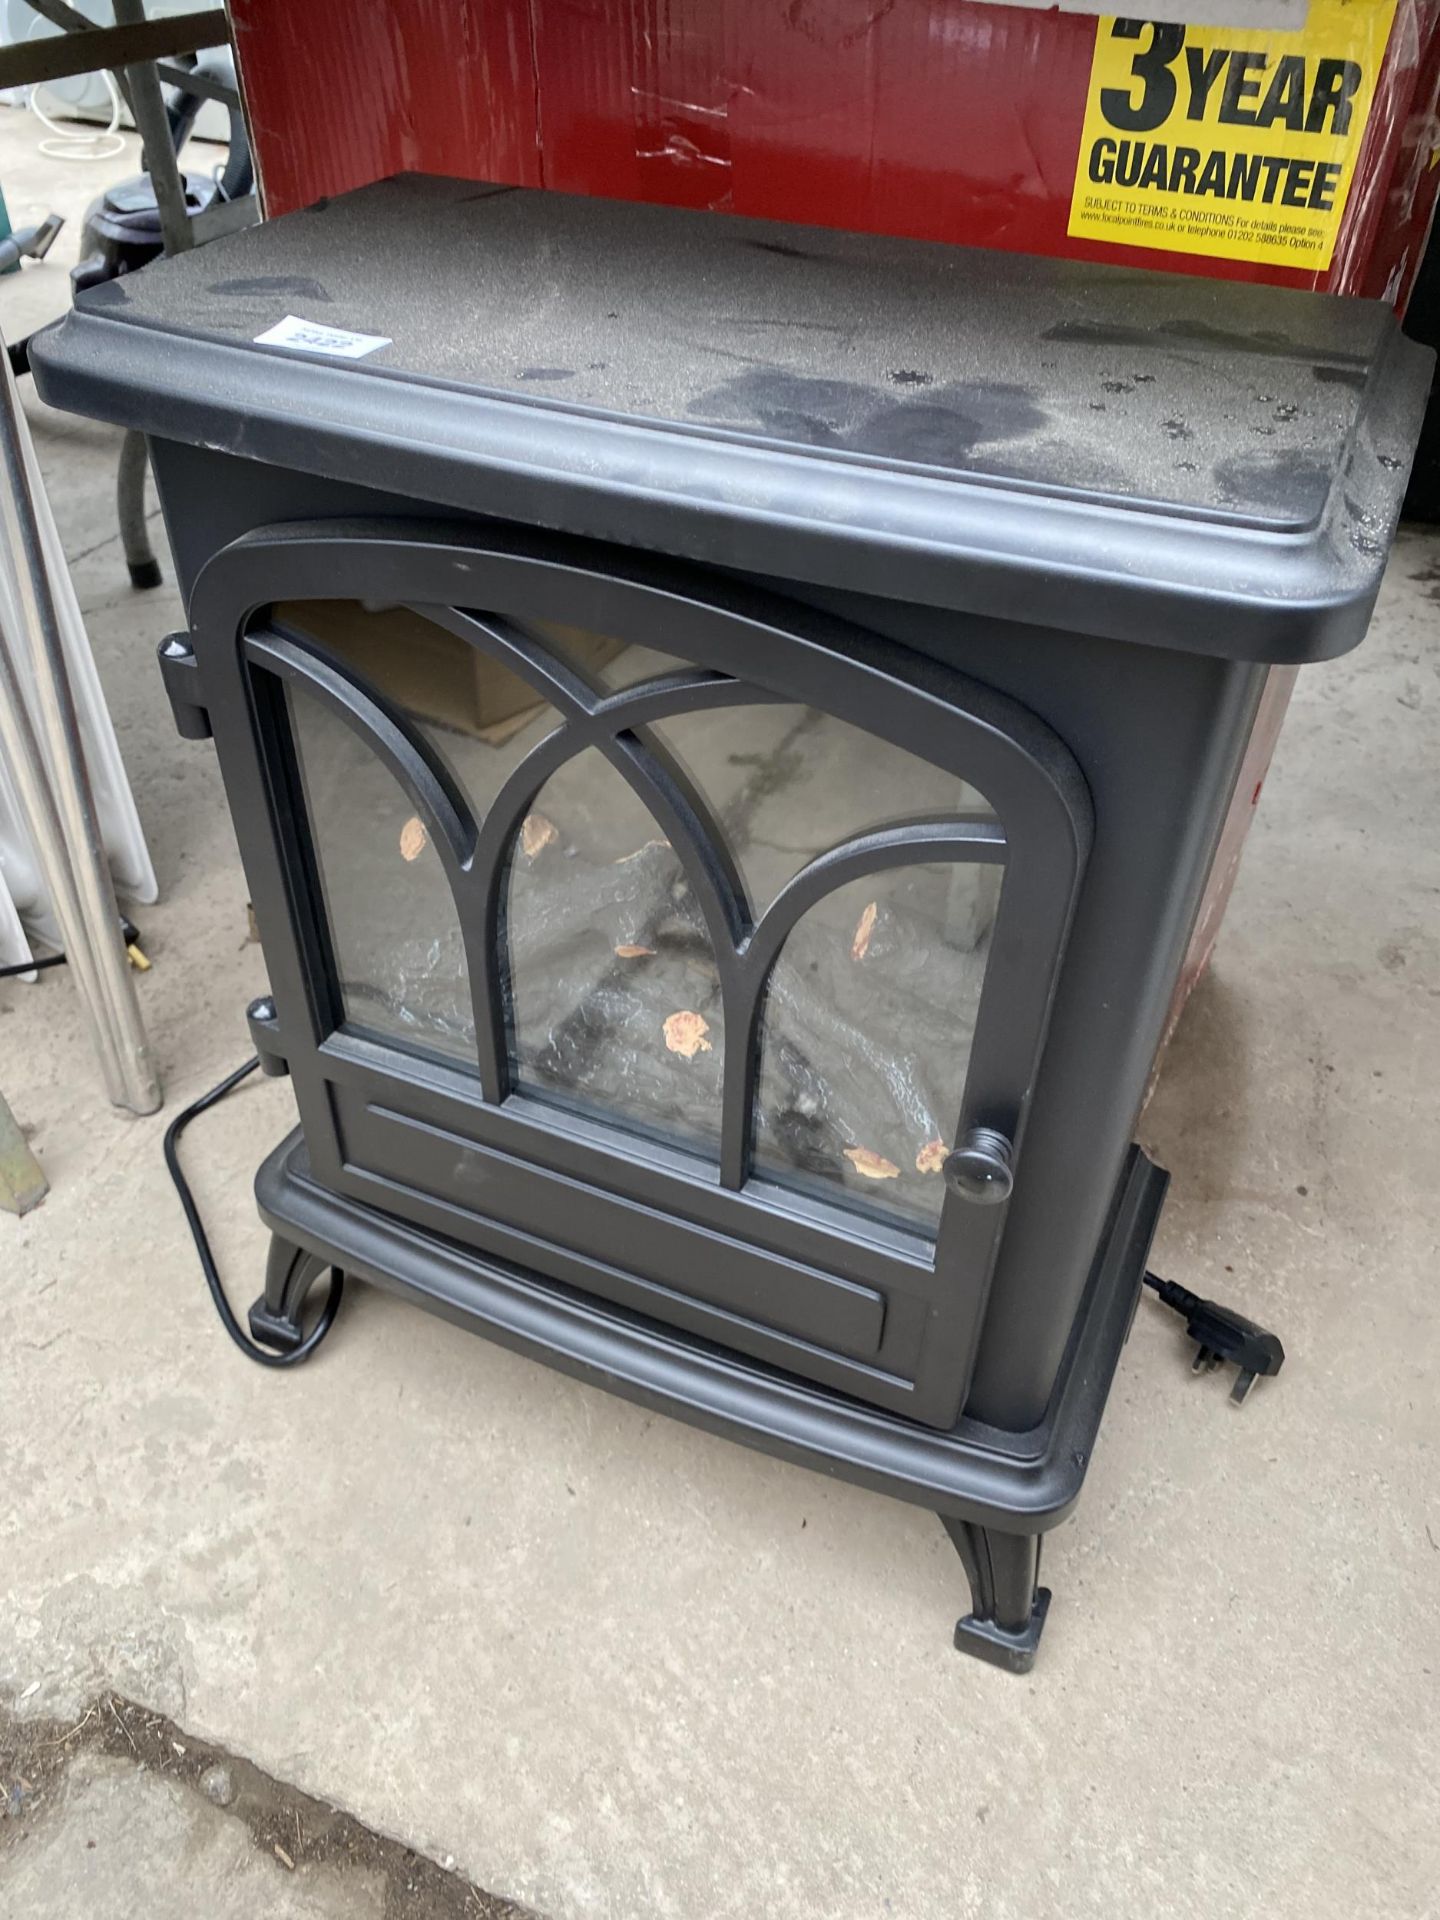 A BLACK ELECTRIC HEATER IN THE FORM OF A LOG BURNER